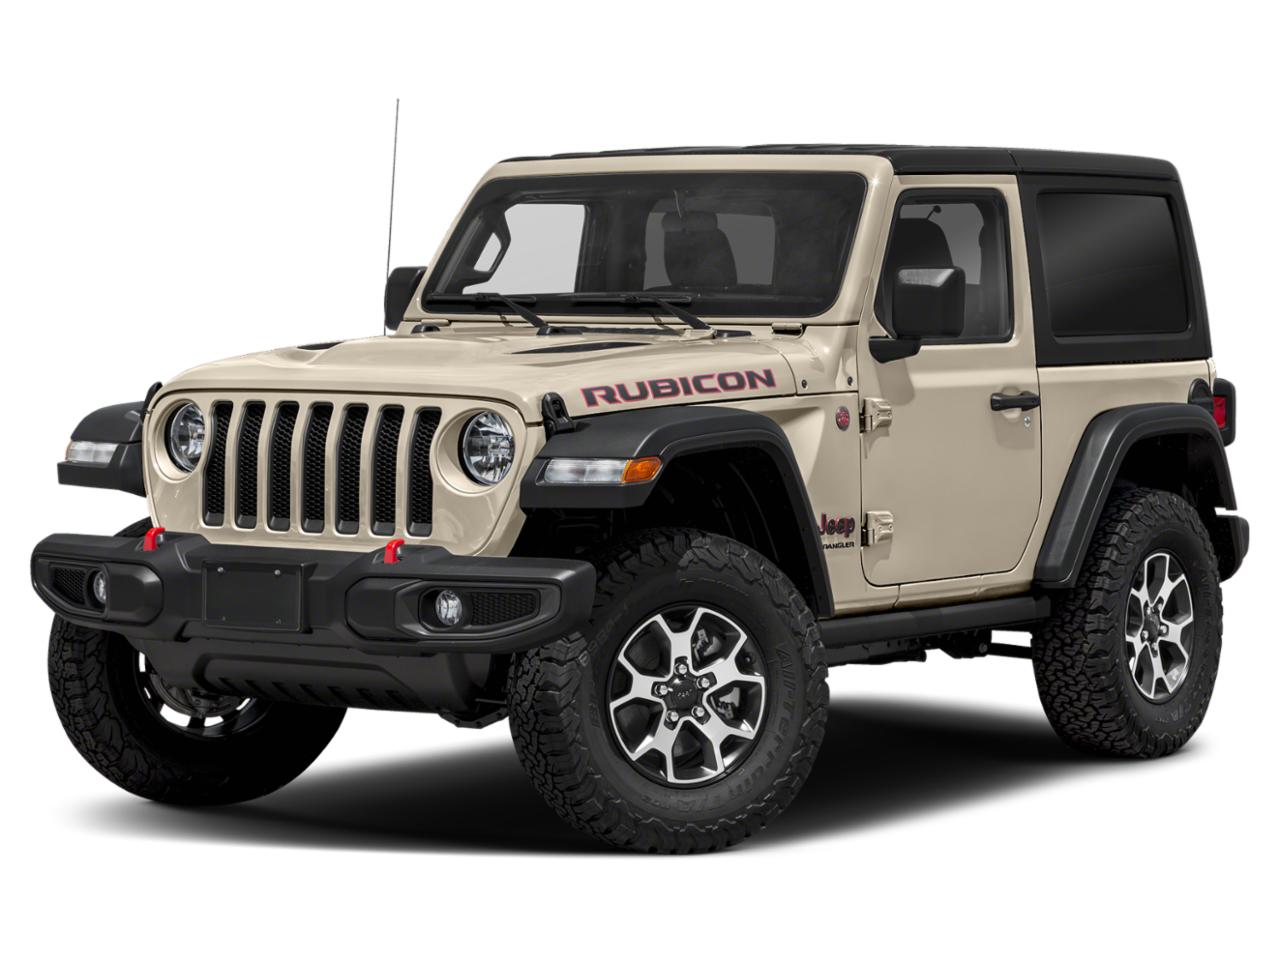 How Much Does a Rubicon Cost: Get the Best Price Today.